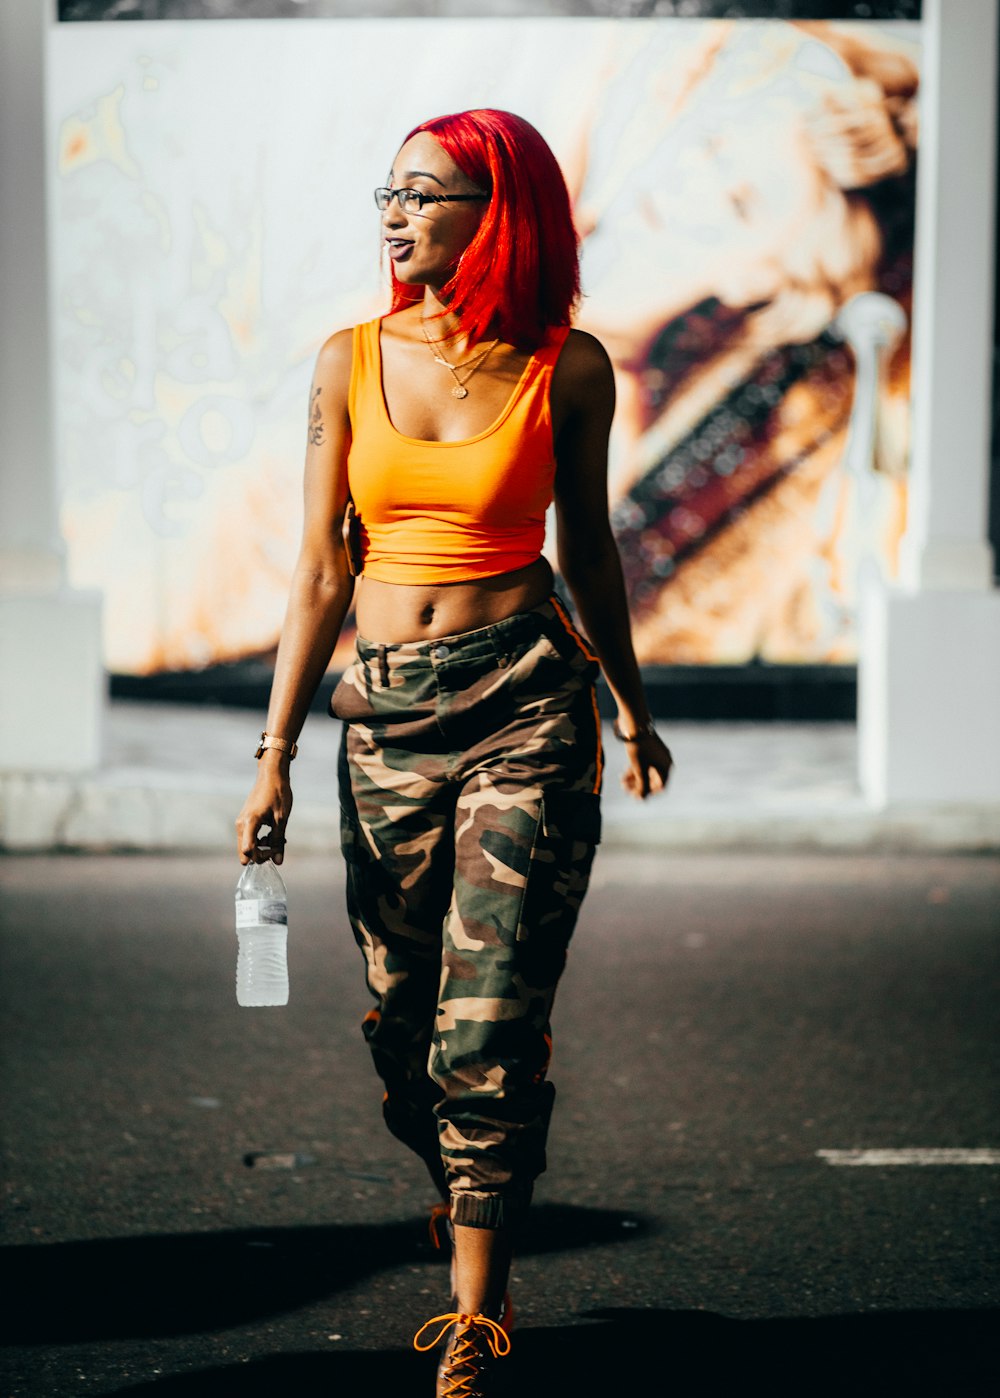 Woman in orange tank top and camouflage pants standing on road